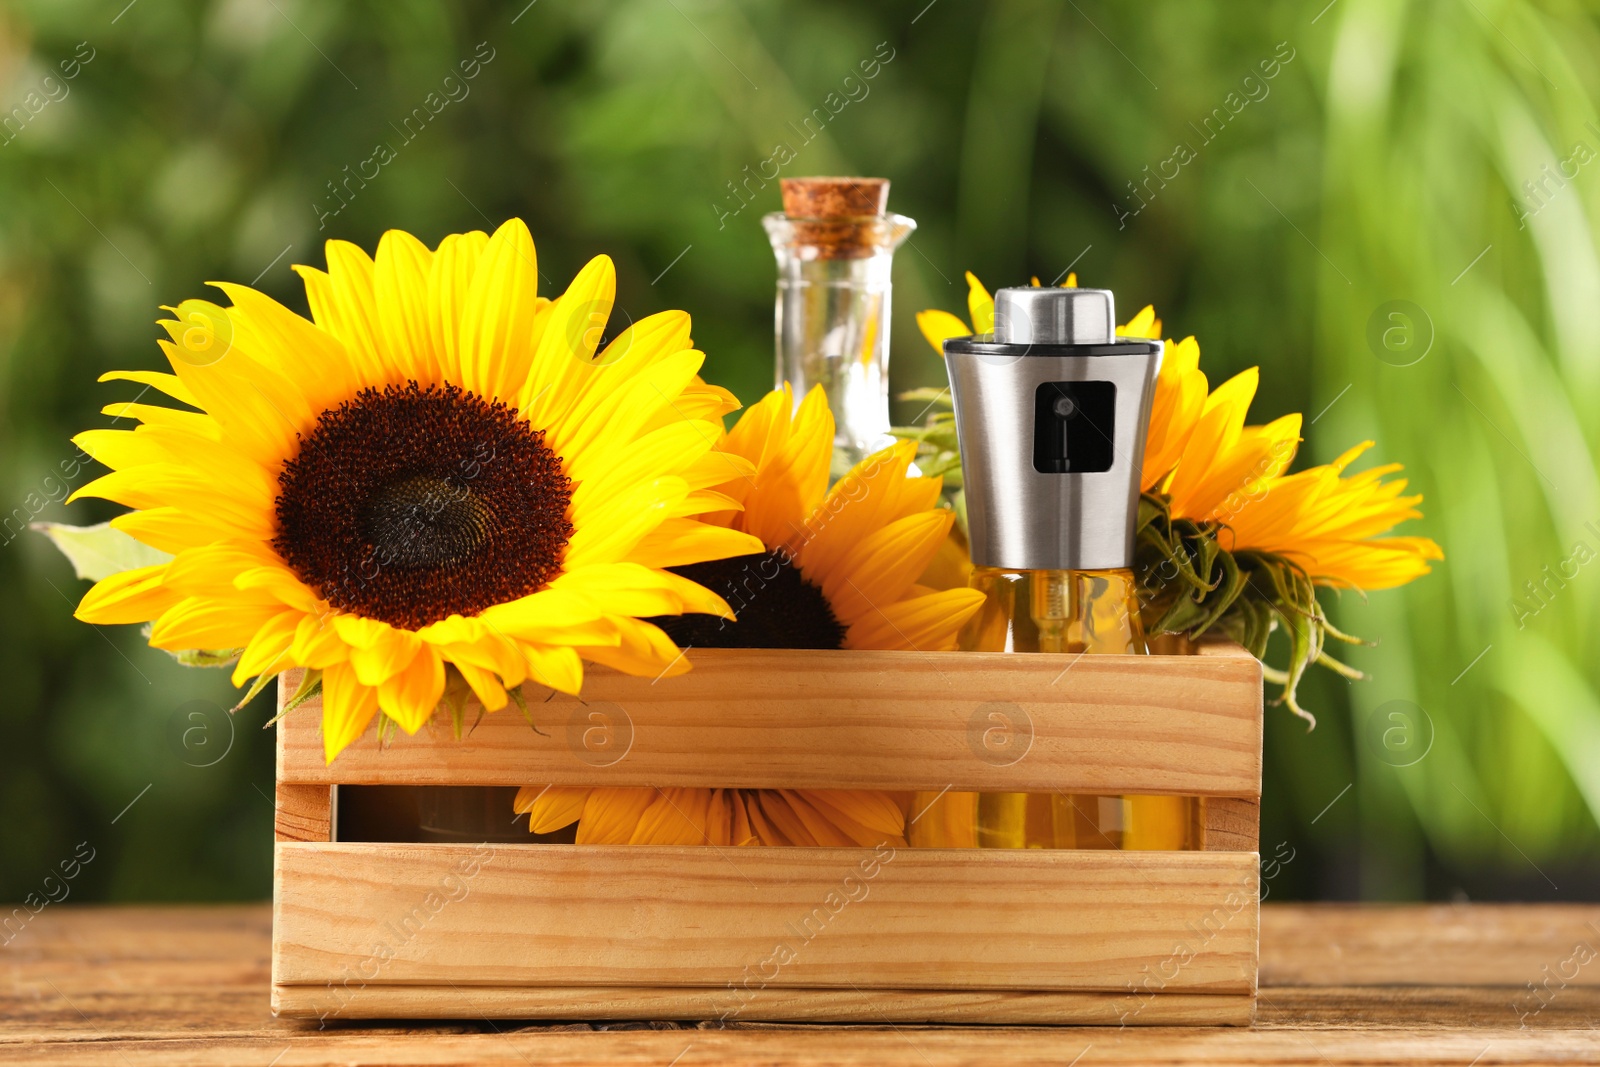 Photo of Crate with bottles of cooking oil and sunflowers on wooden table against blurred background